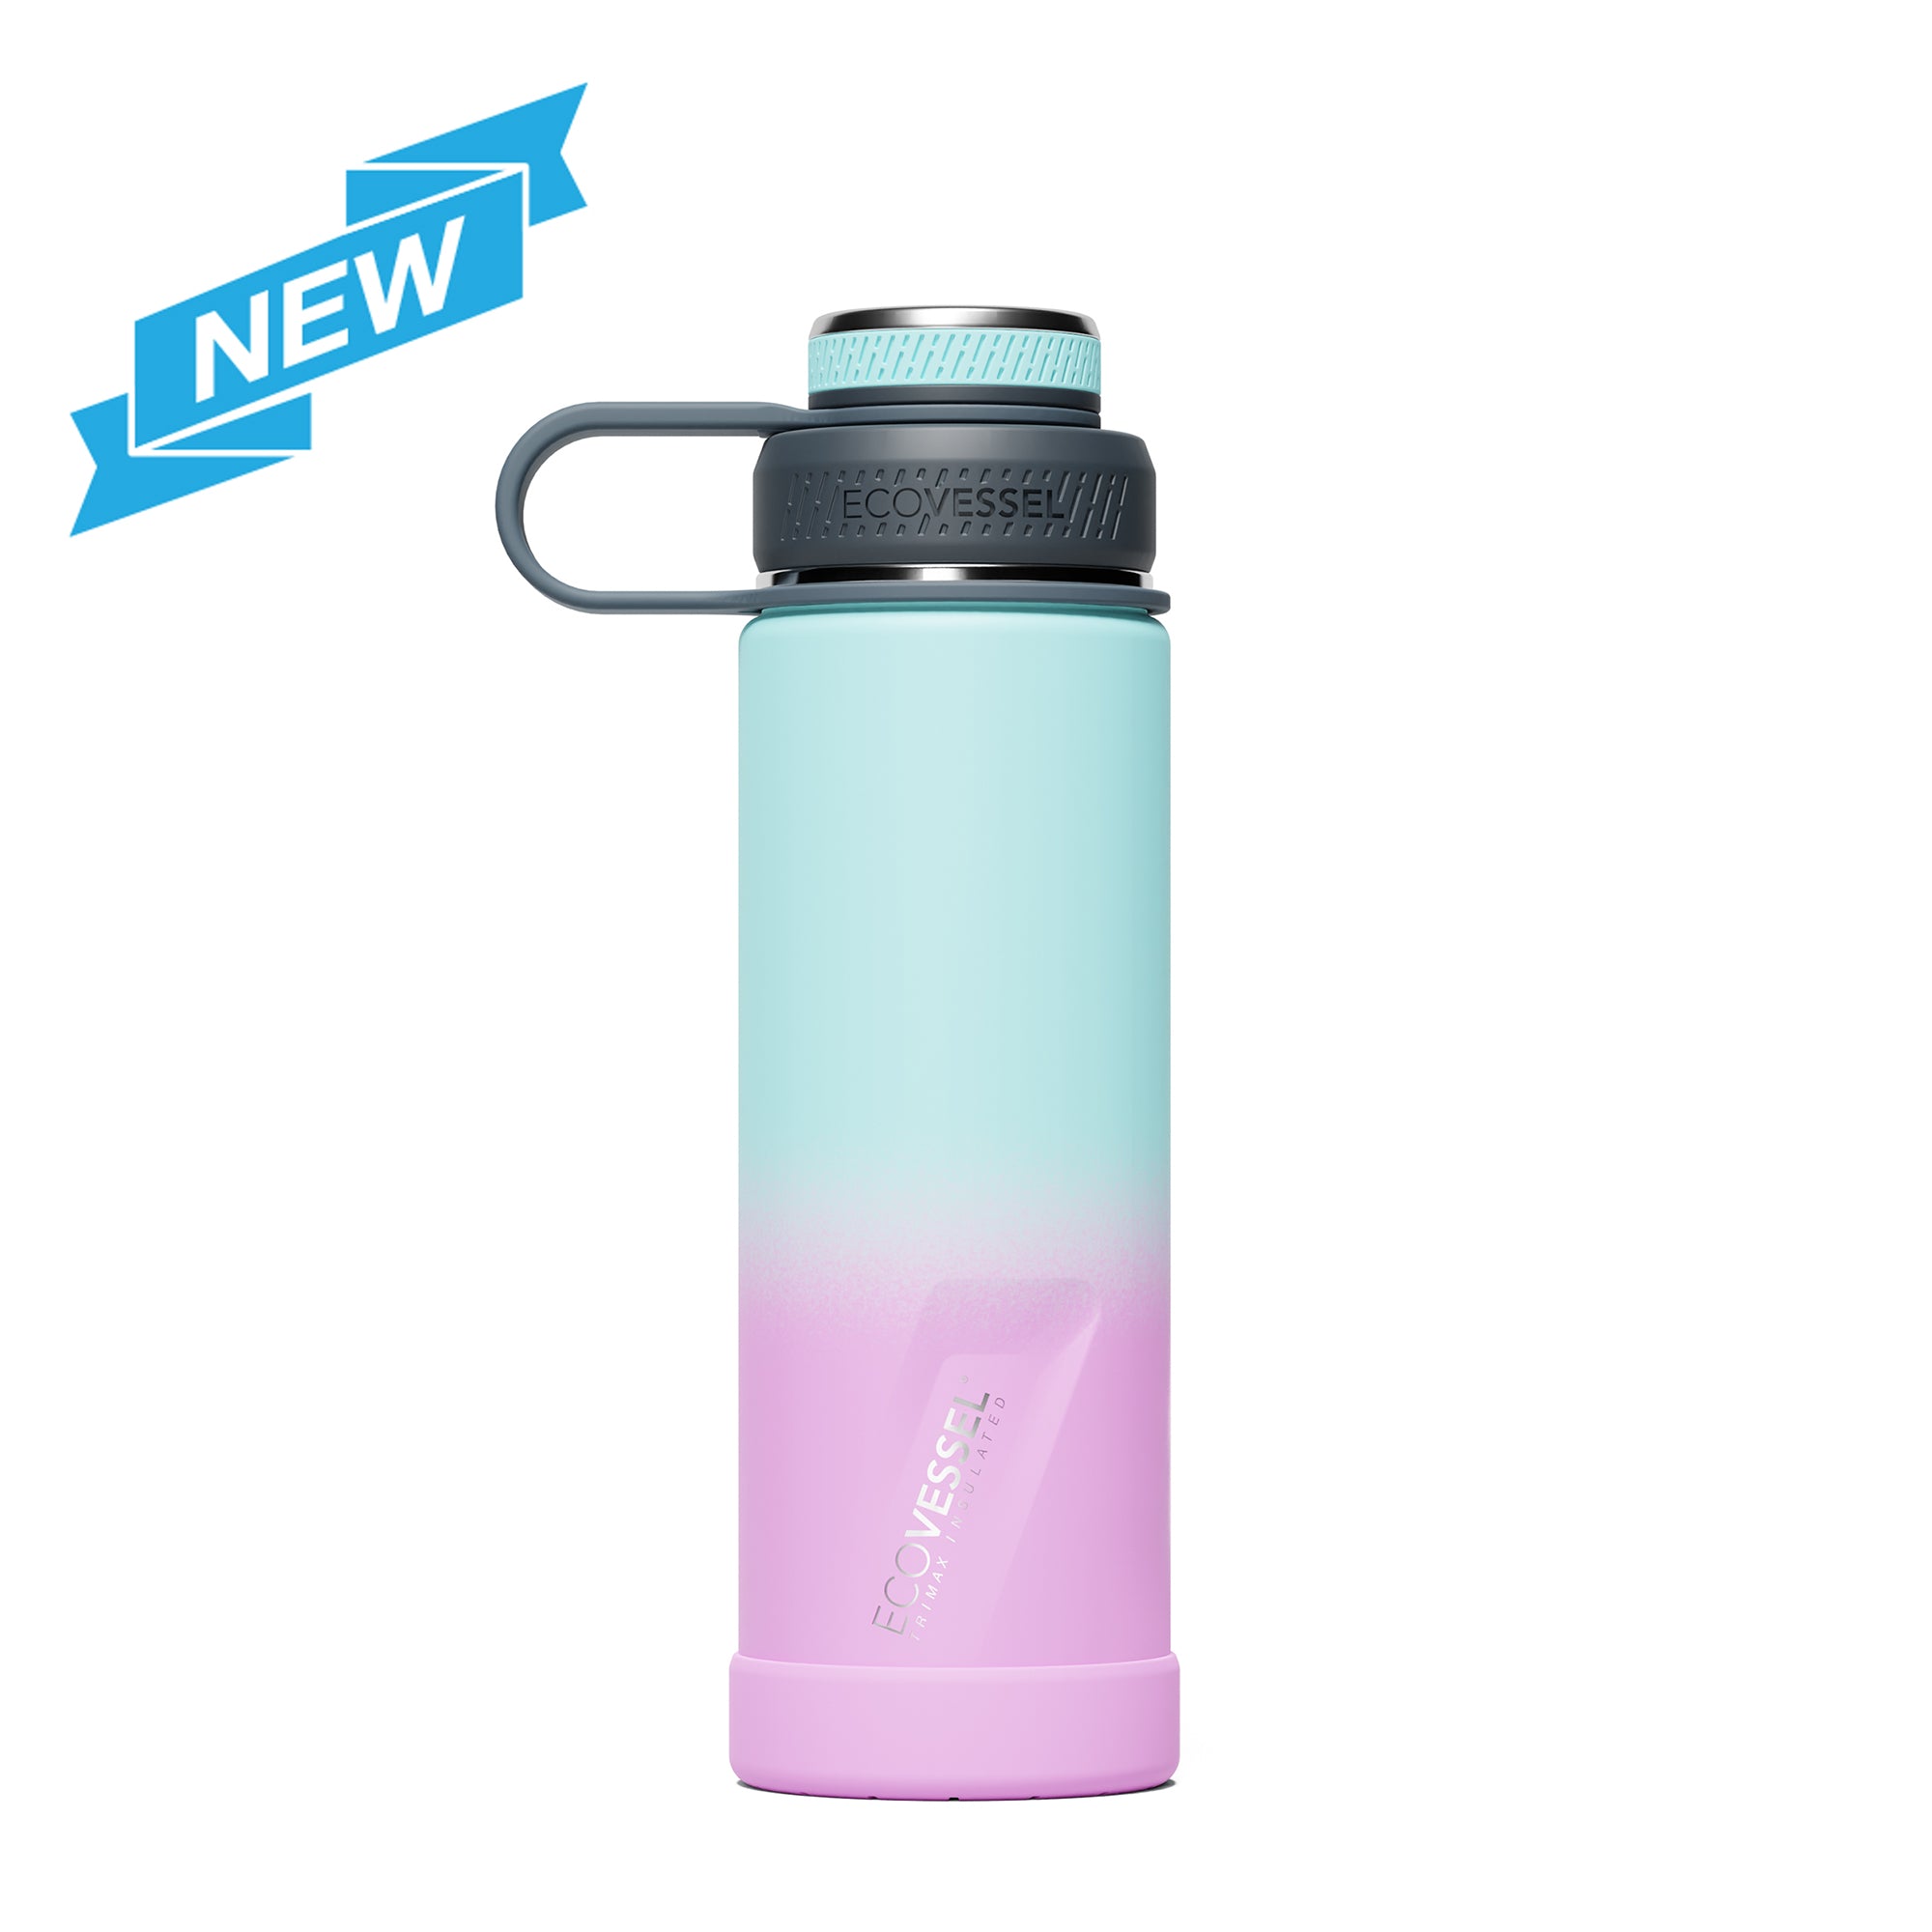 THE BOULDER - Insulated Water Bottle w/ Strainer - 20 oz